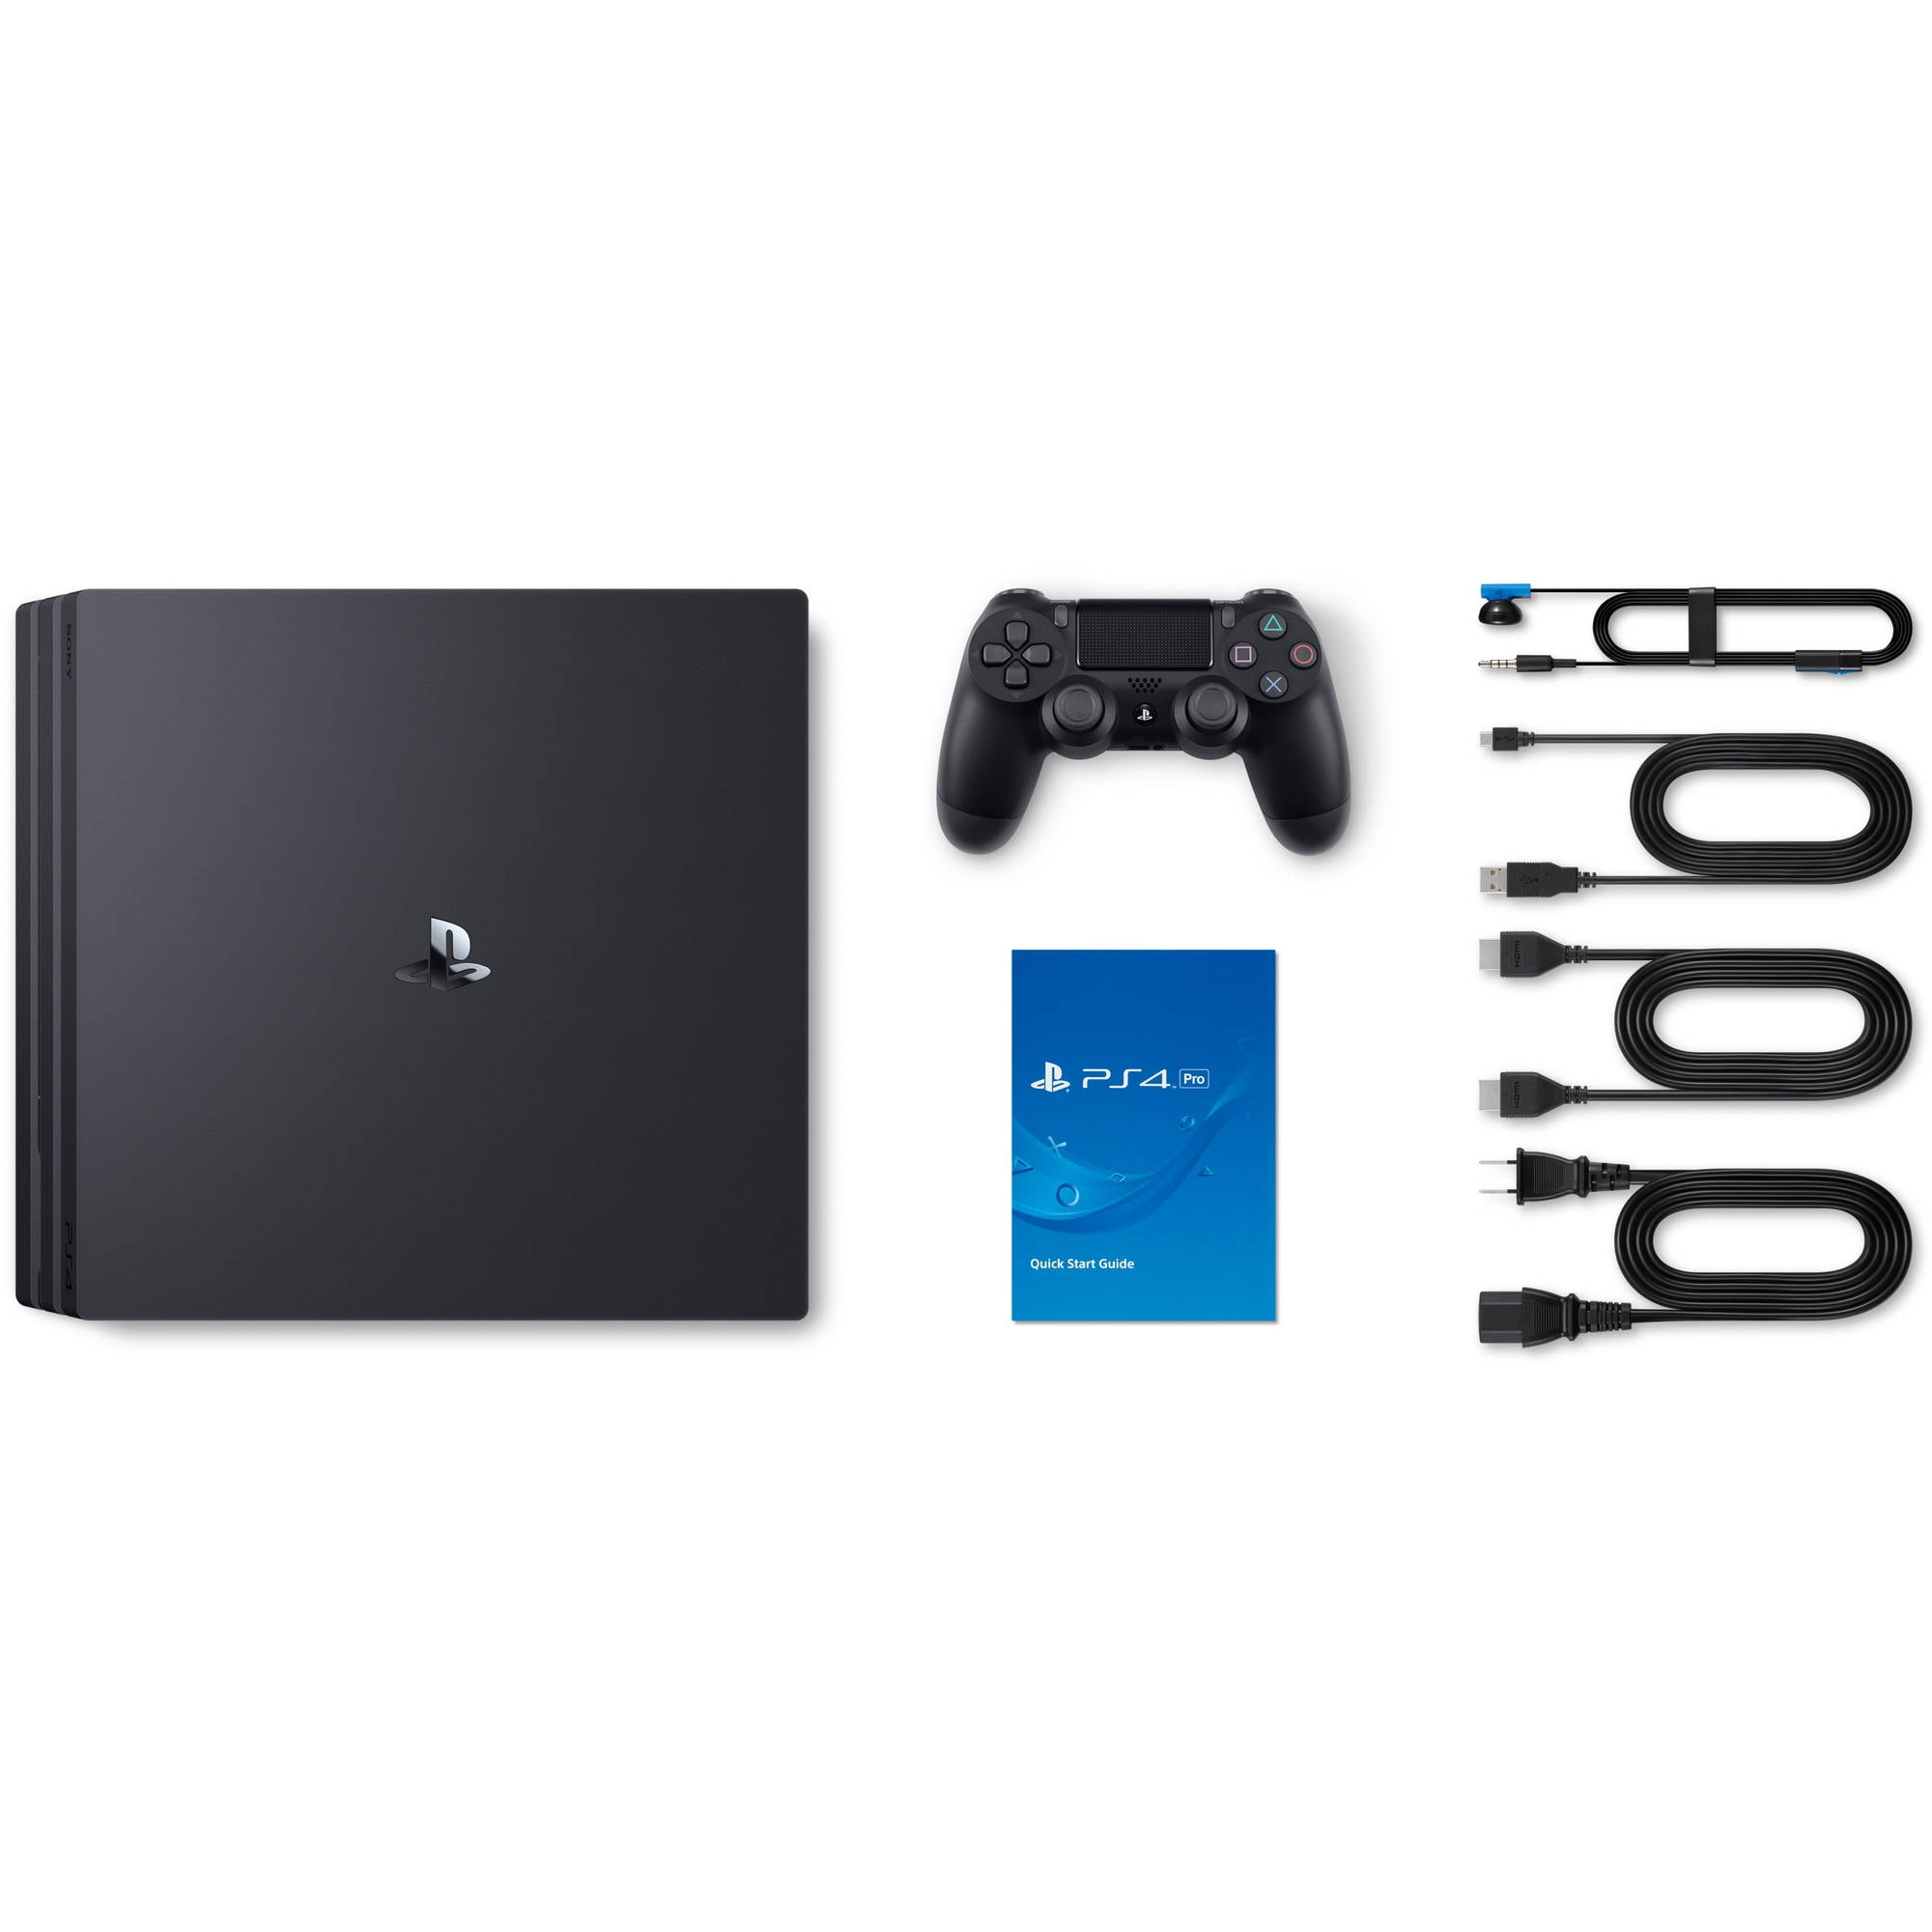 PlayStation 4 Pro 1TB Gaming Console, Black, 3001510 